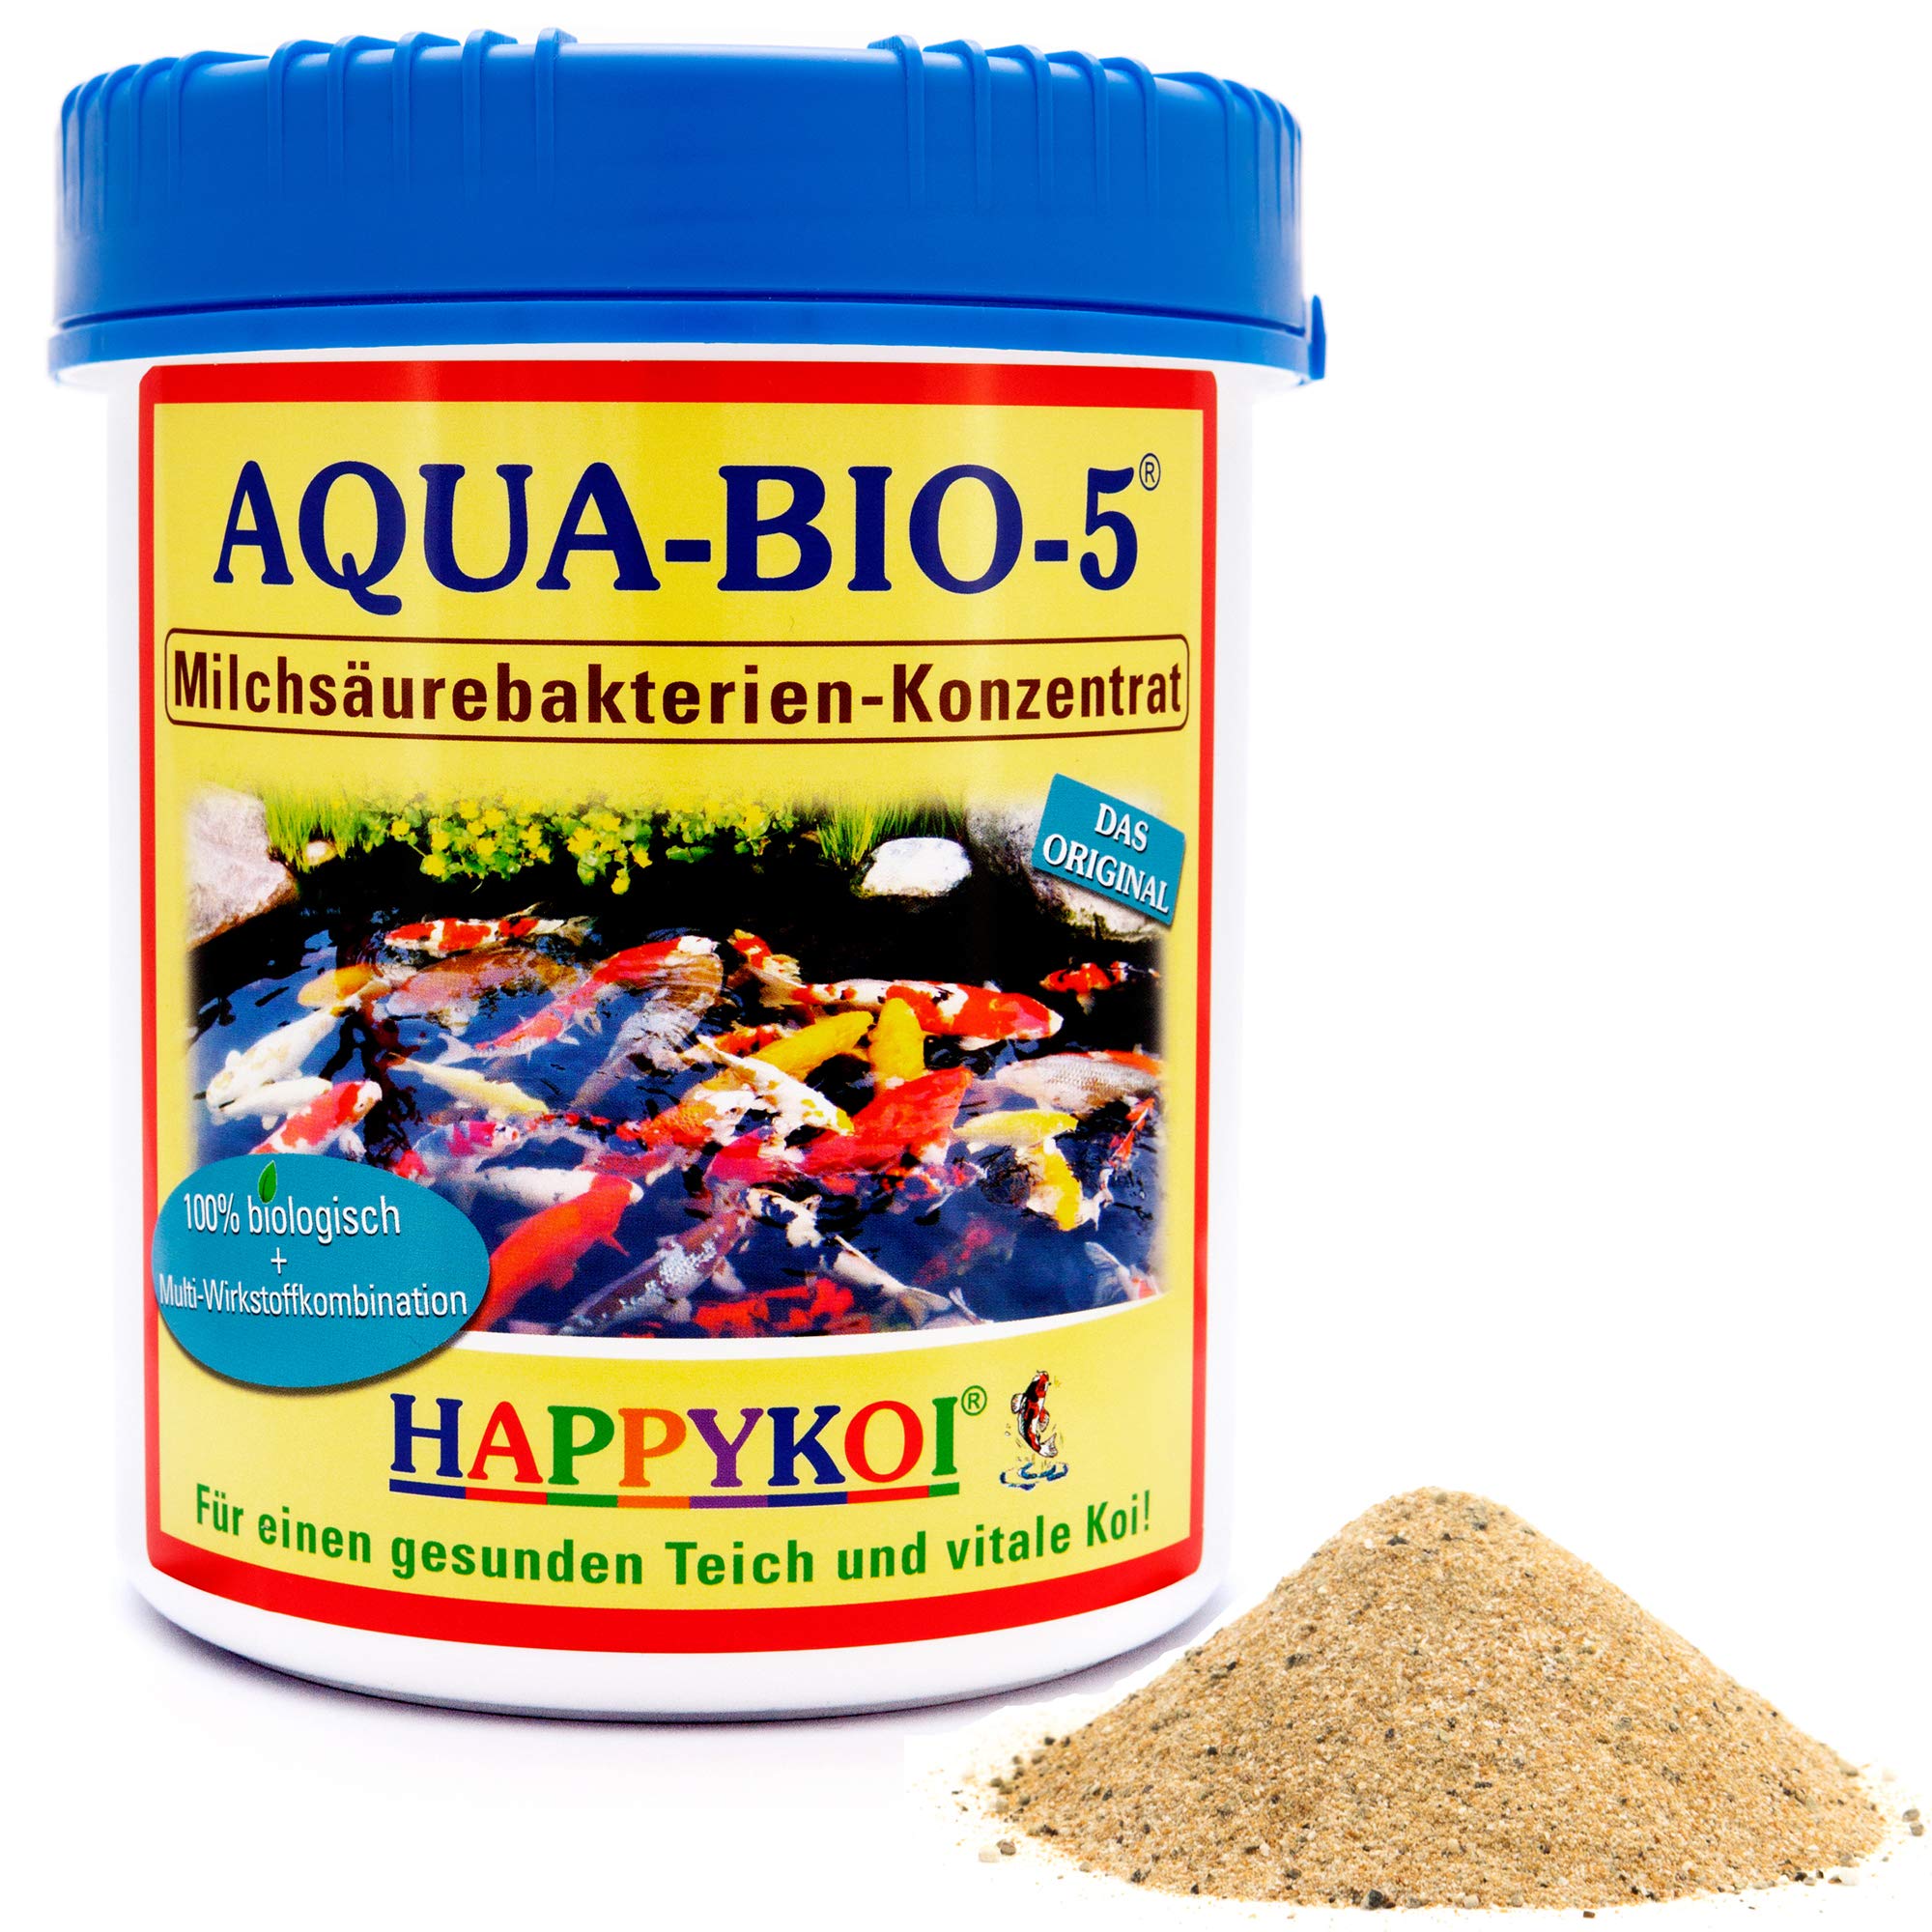 AQUA BIO 5 lactic Acid Bacteria Powder, probiotic Filter Bacteria for Koi Pond, Pond and Garden Pond, Support Nitrification, Remove Algae and mud. The All-Round Protection for koi and Pond. (1500 ml)